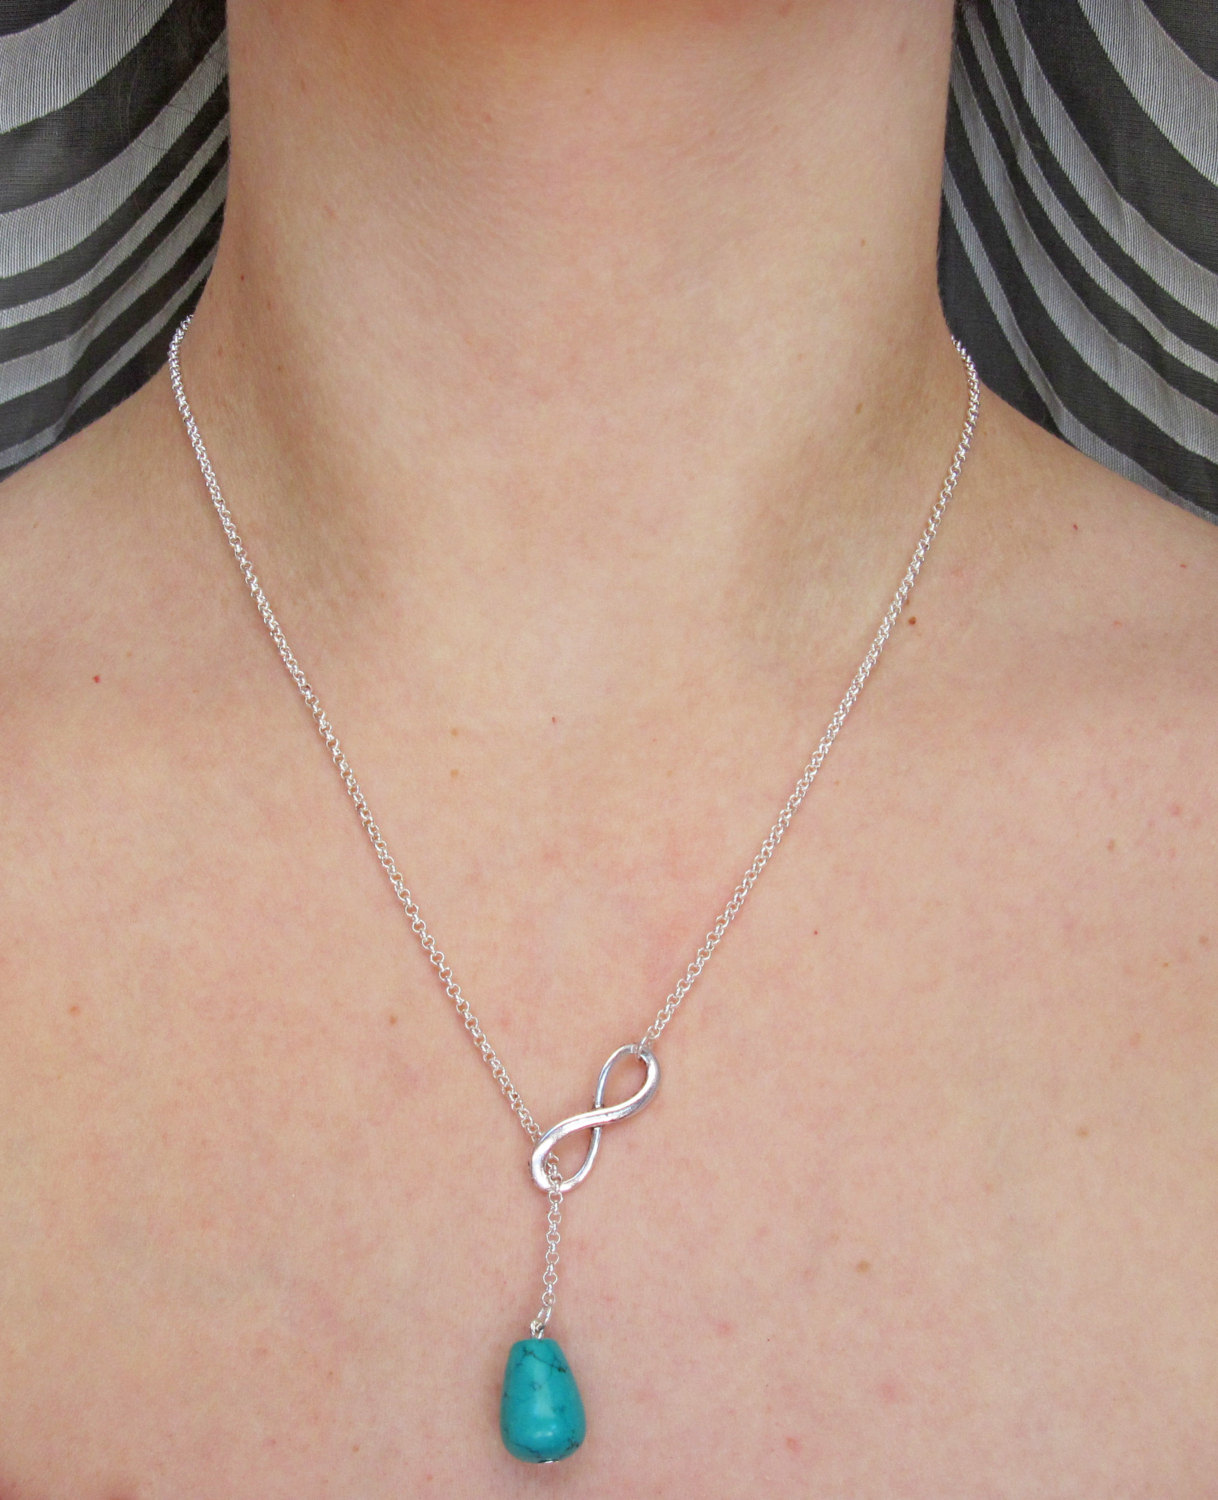 Turquoise Necklace, Lariat Necklace, Infinity Necklace, Turquoise Jewelry, Y Necklace, Infinity Jewelry, Turquoise Infinity Necklace